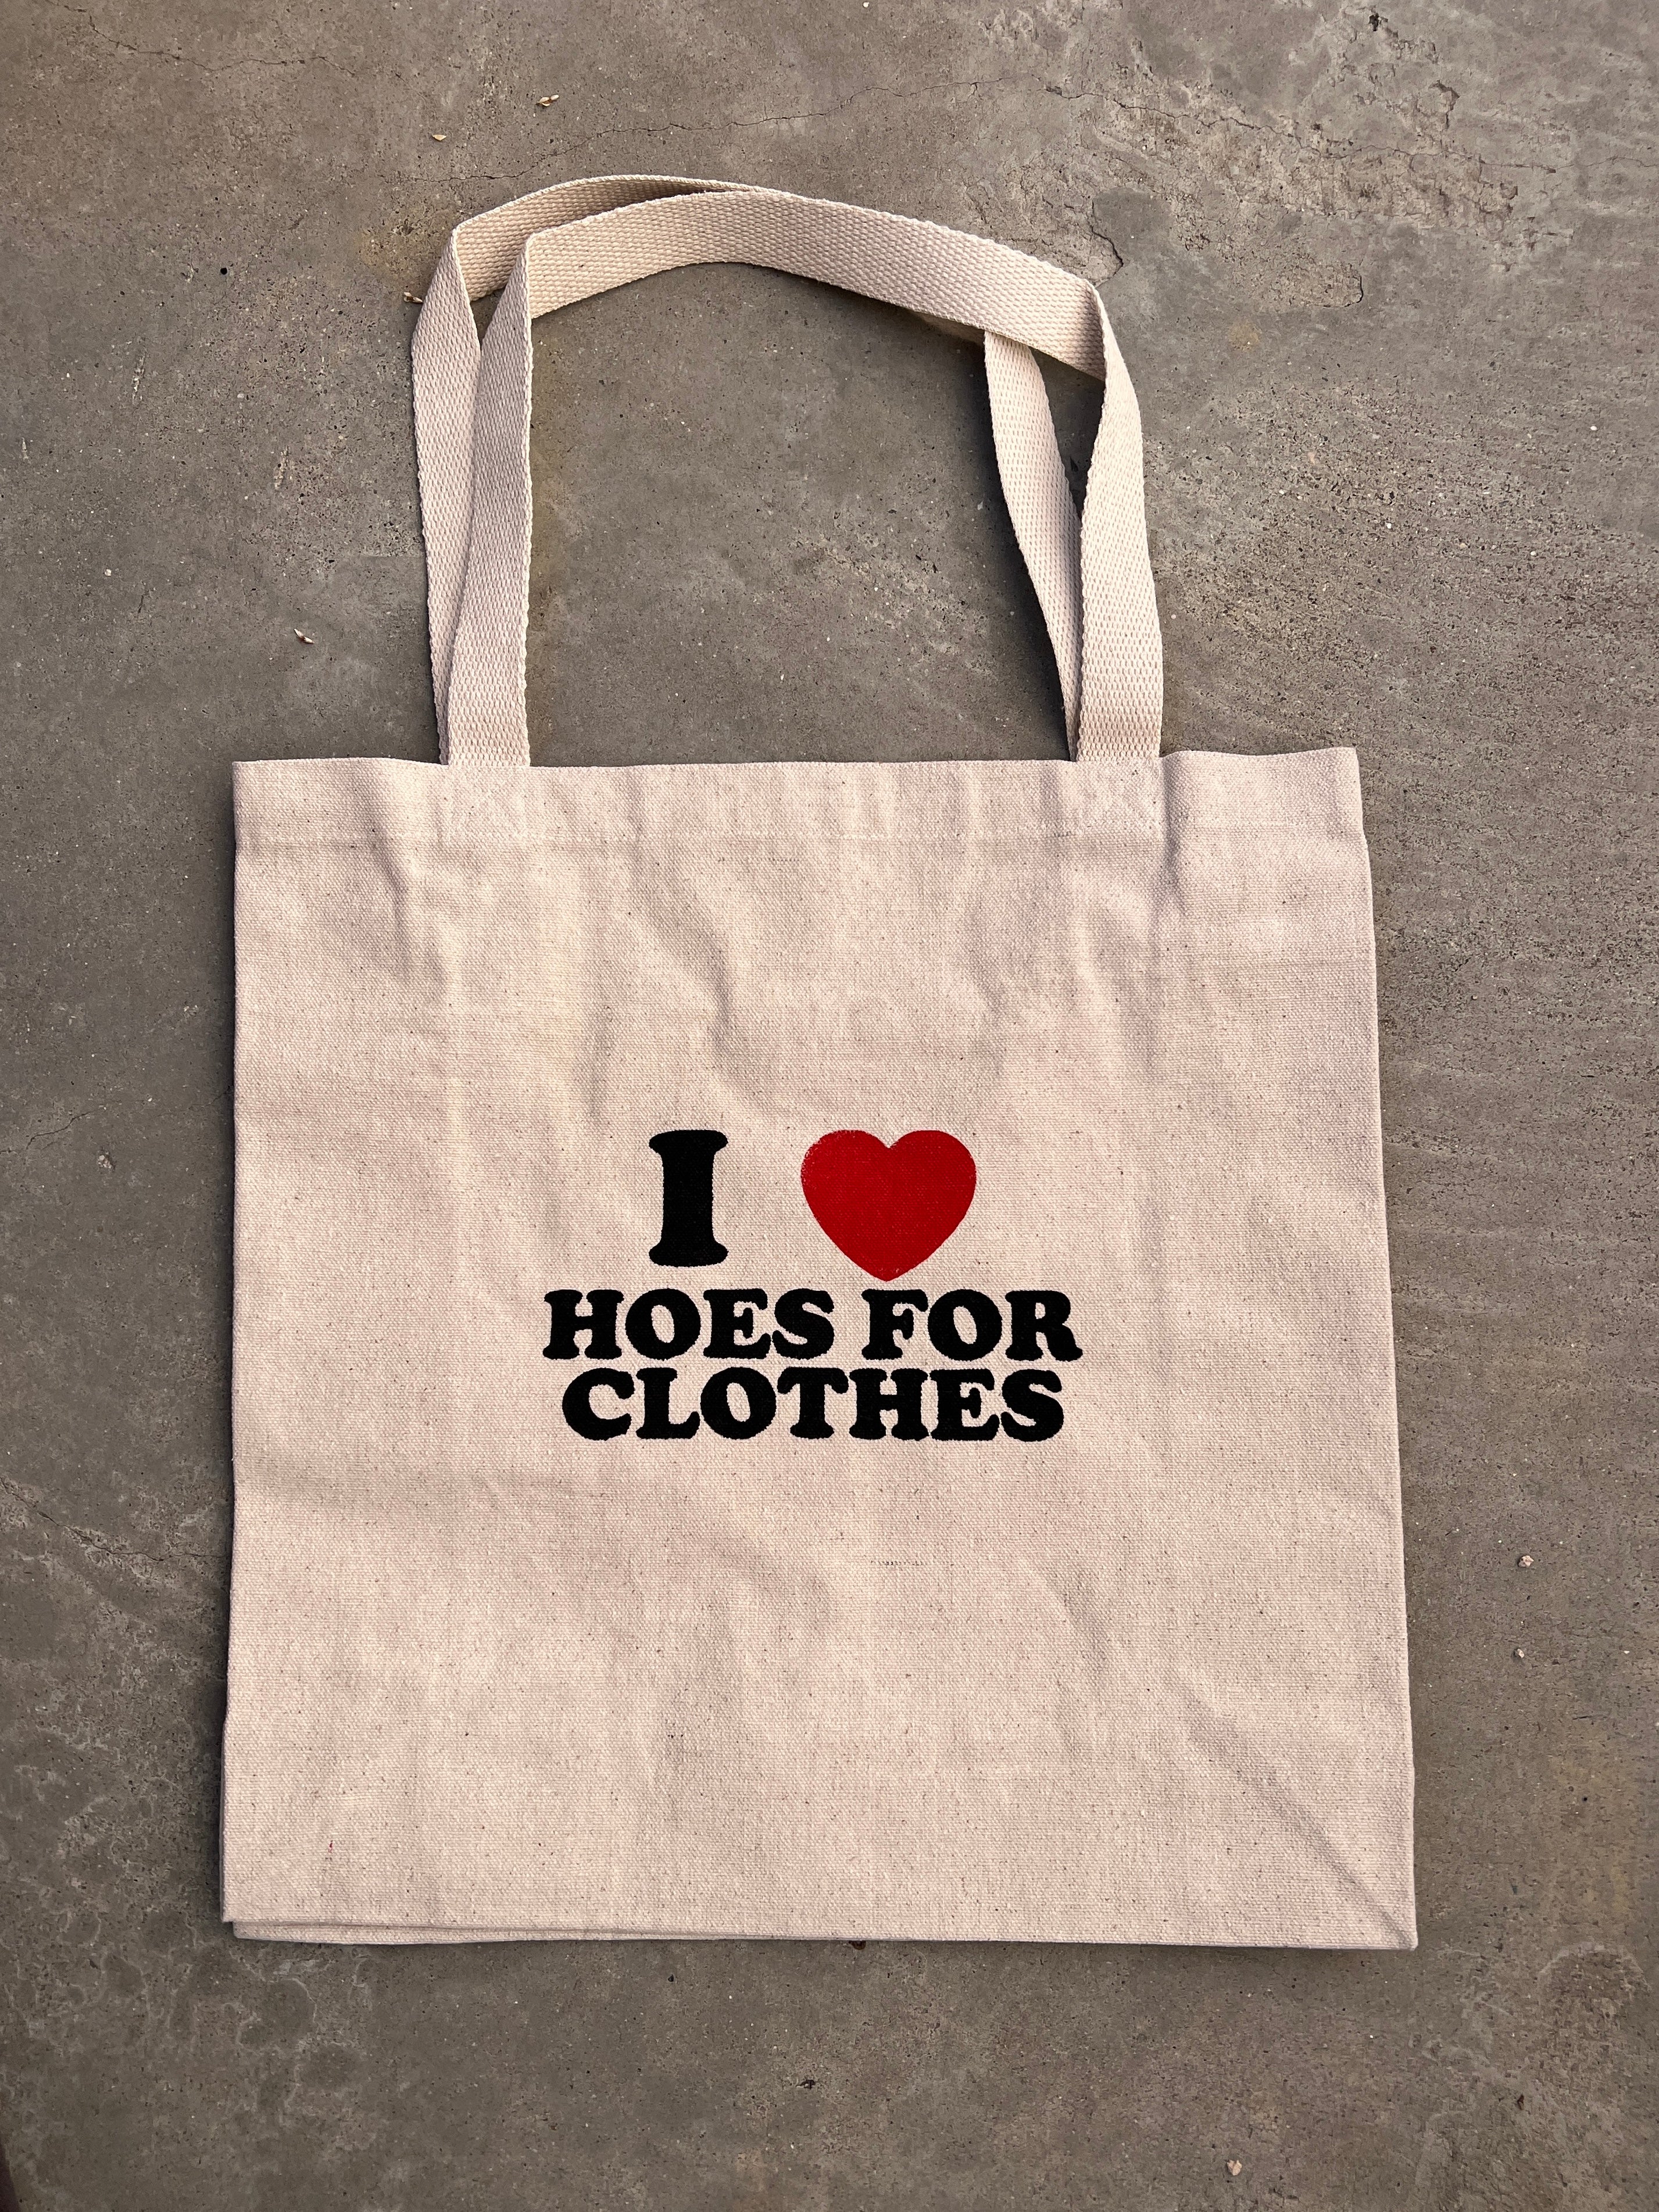 I HEART HOESFORCLOTHES Tote